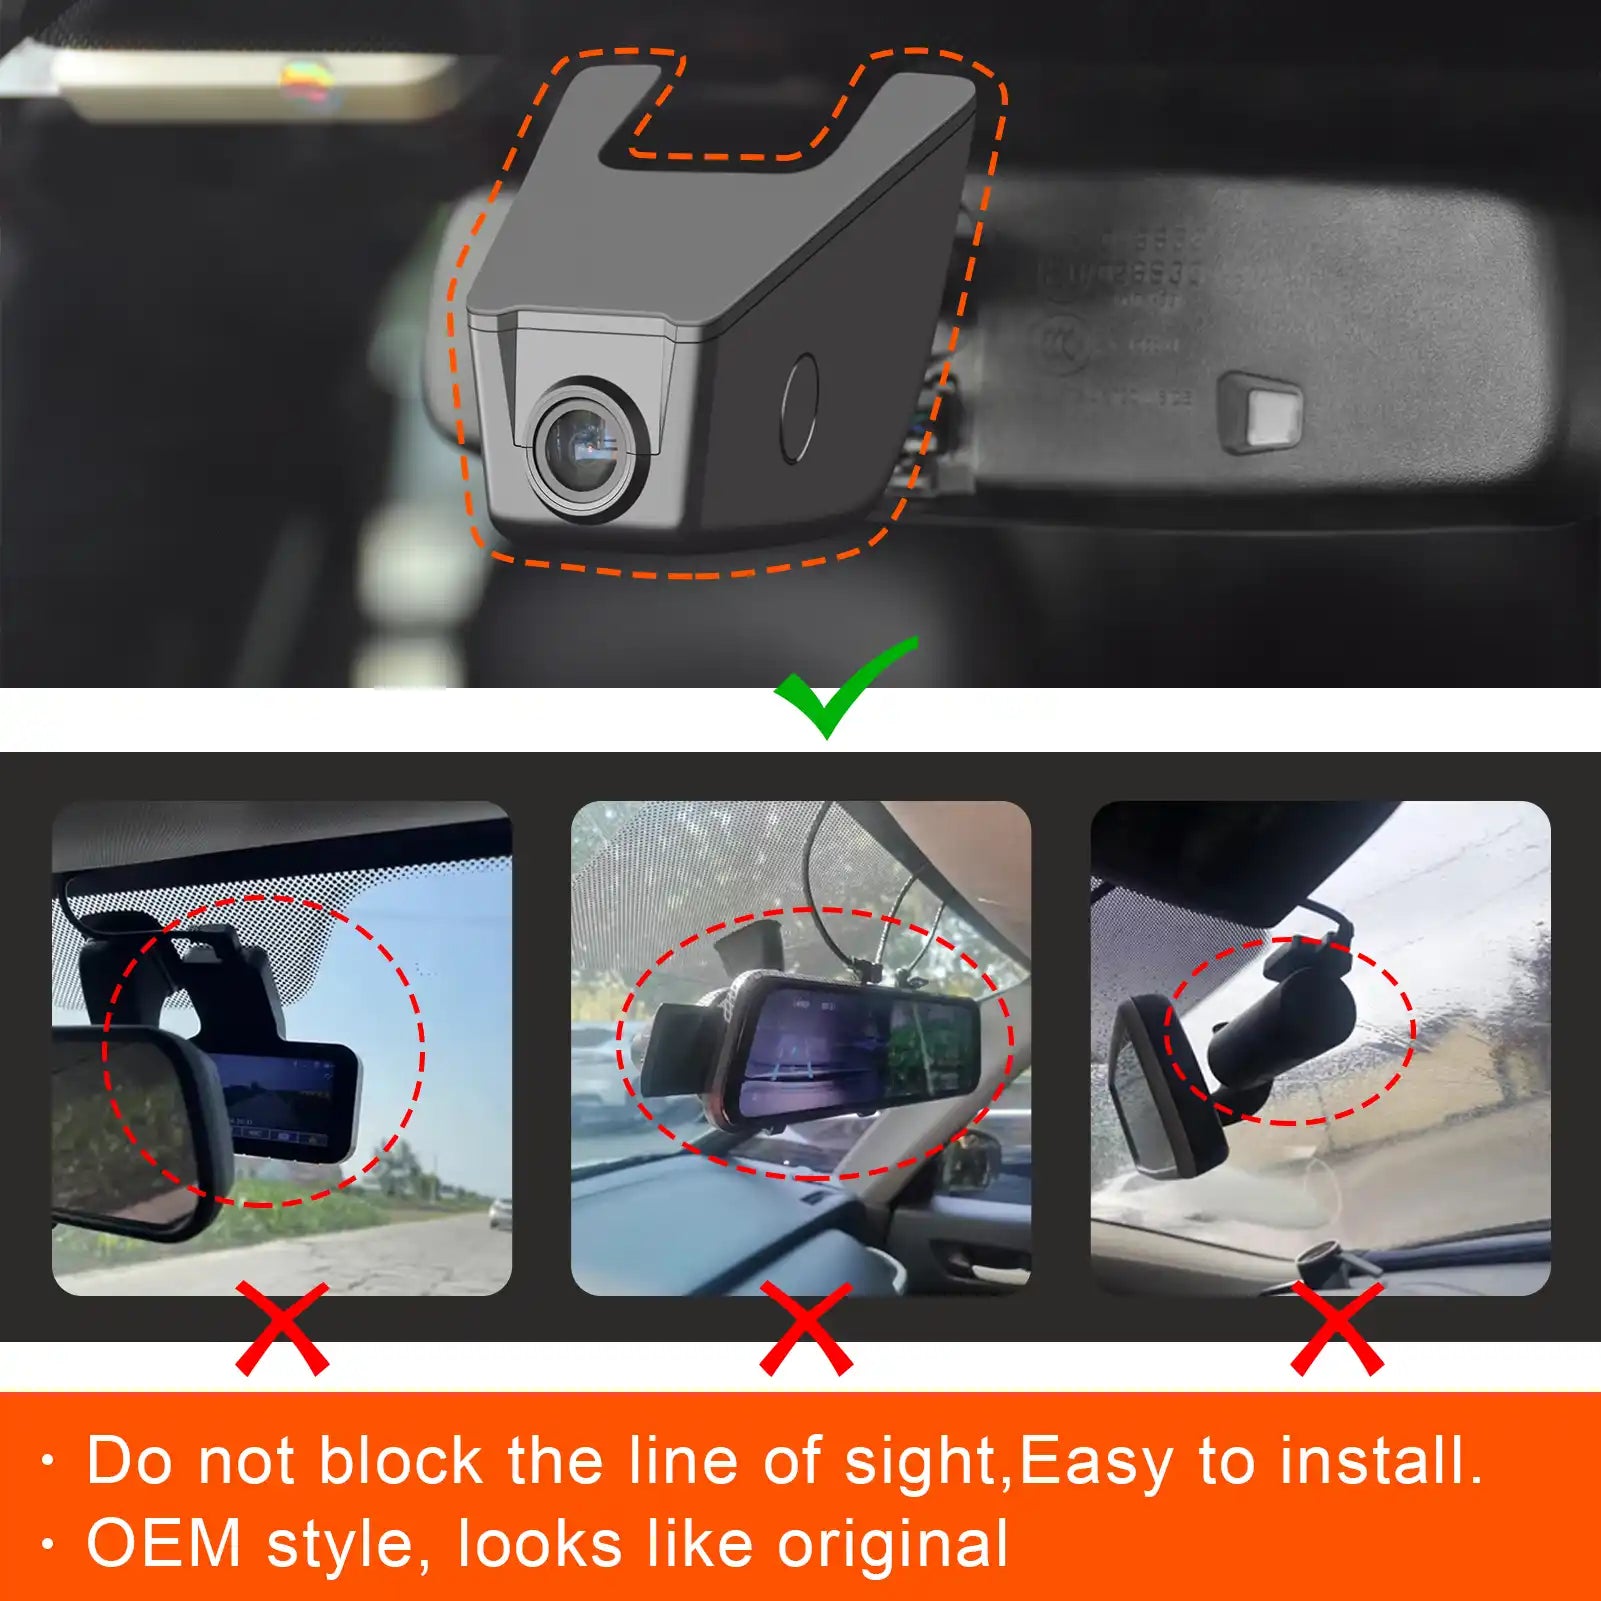 Ford F-series right OEM style dash cam 